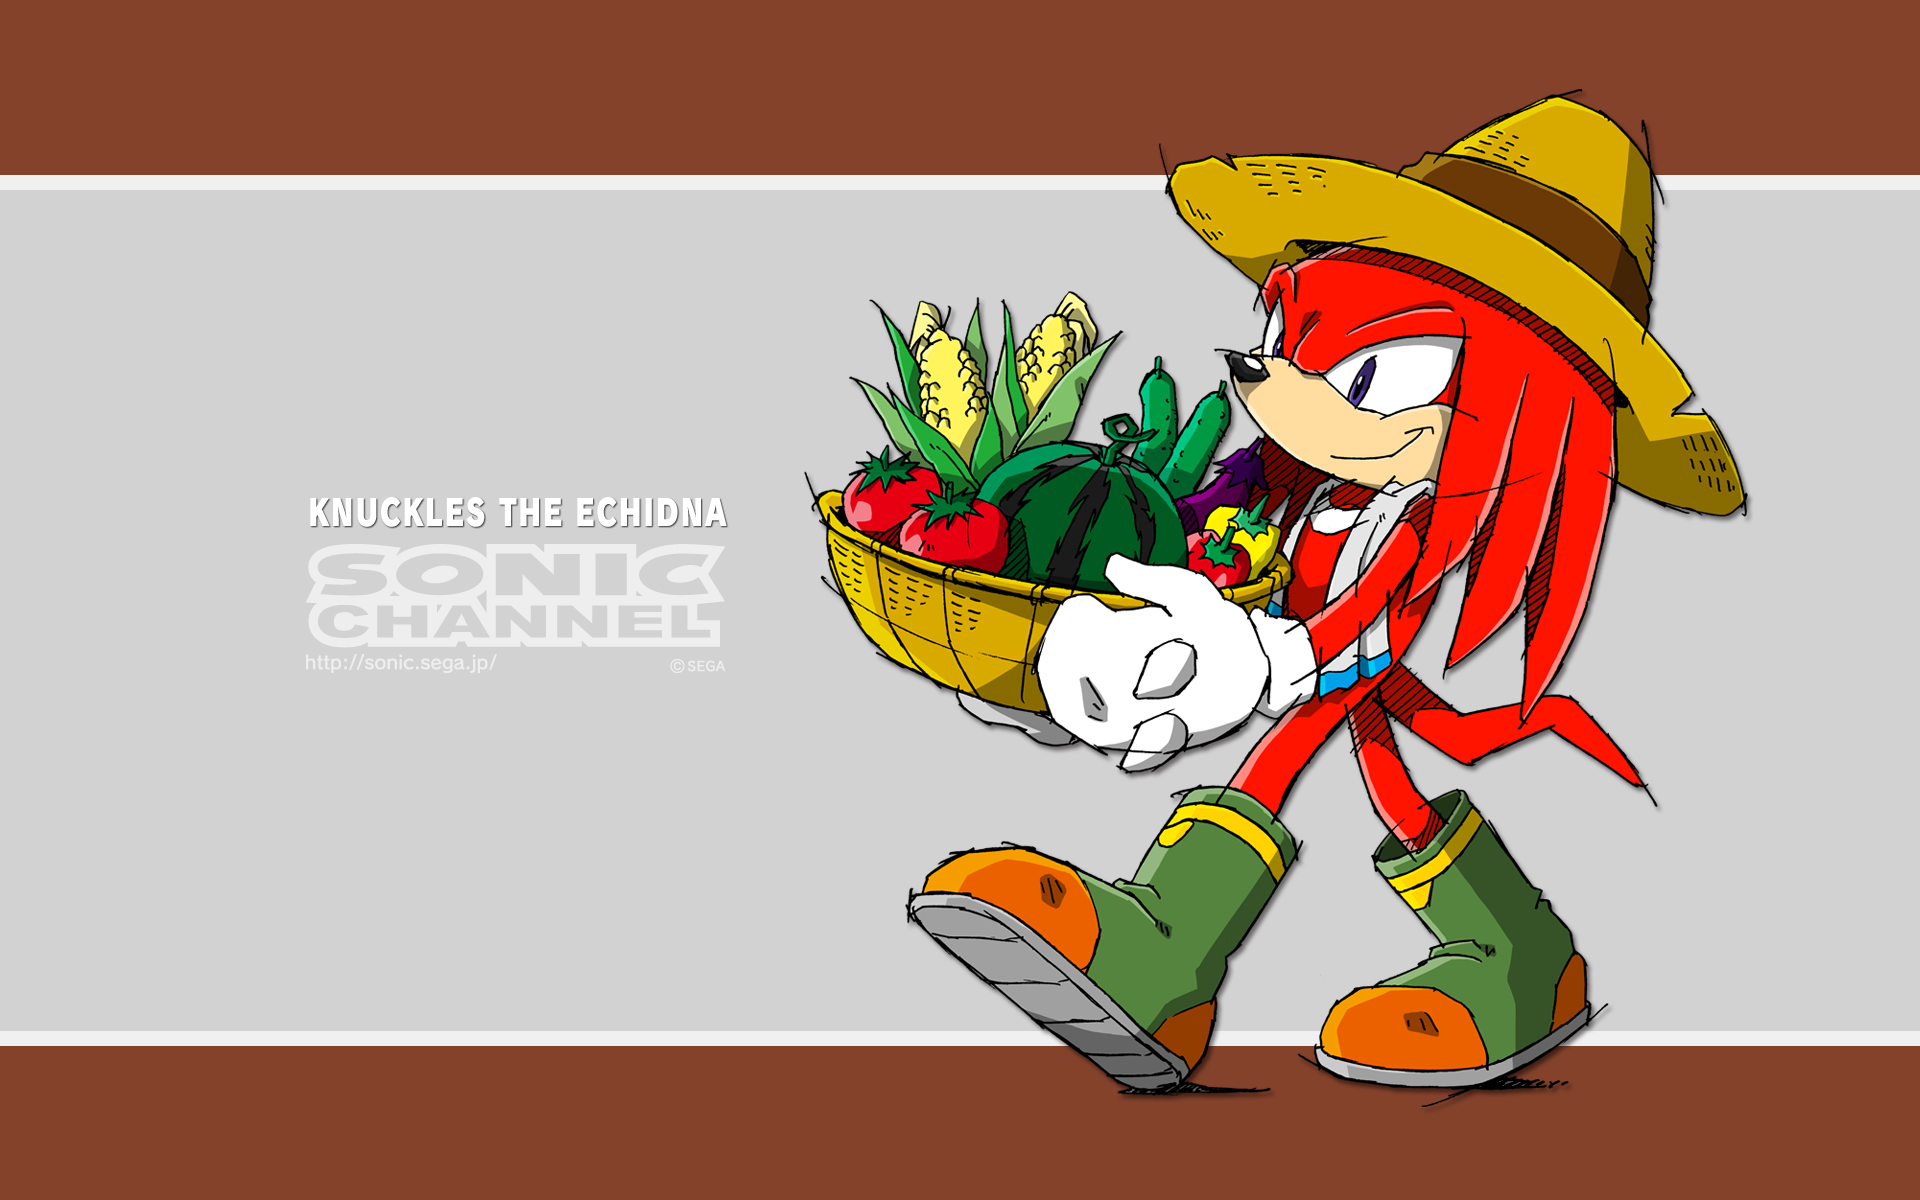 2014/08 - Knuckles the Echidna. 